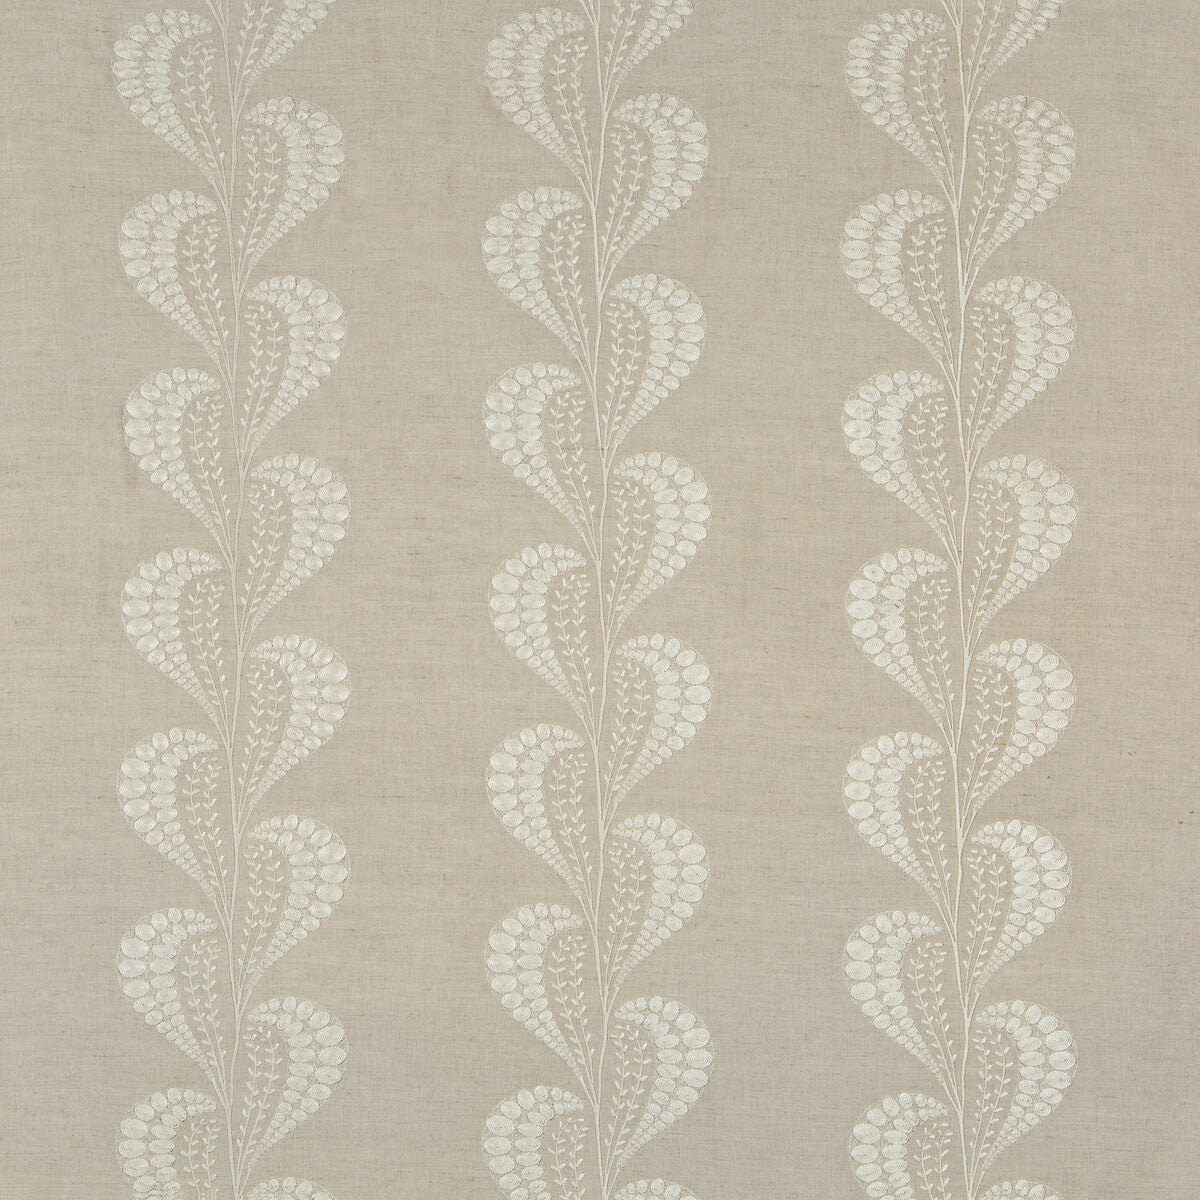 Tisza fabric in linen color - pattern 4787.16.0 - by Kravet Couture in the Windsor Smith Naila collection